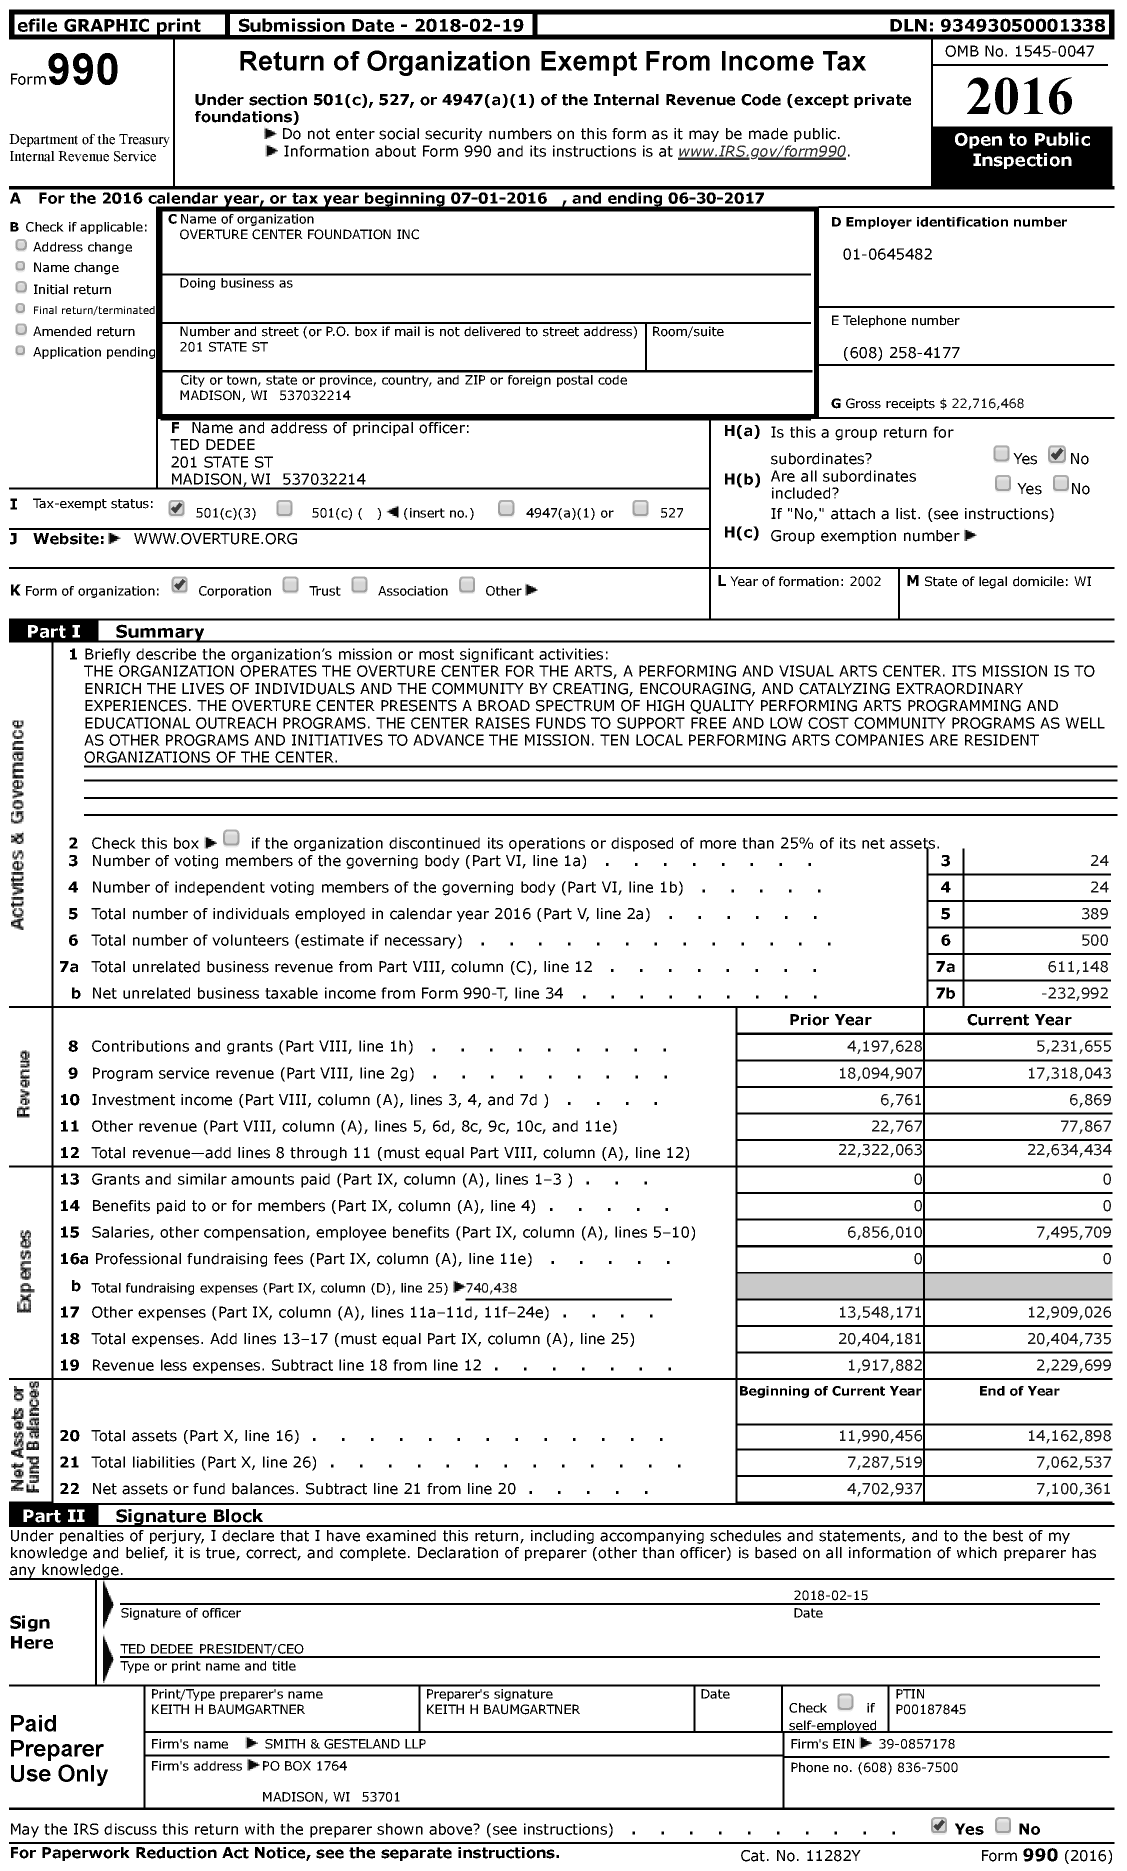 Image of first page of 2016 Form 990 for Overture Center Foundation